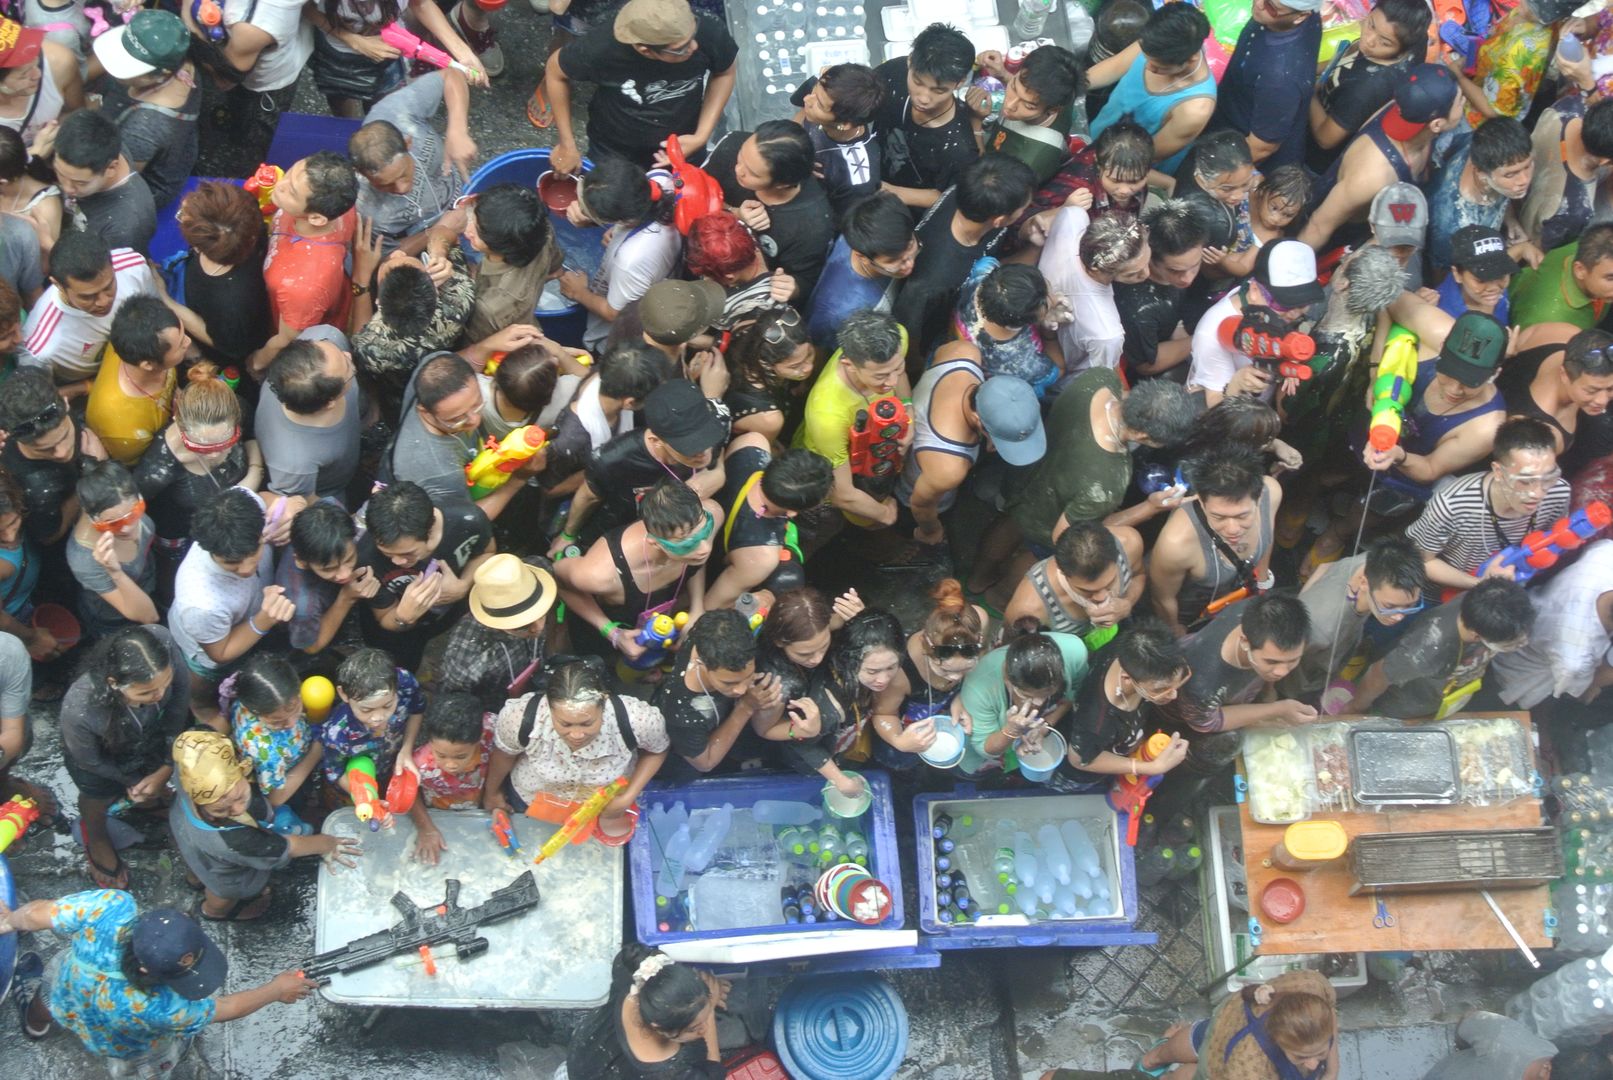 Do's and Don'ts of Songkran: Tips for Celebrating Safely